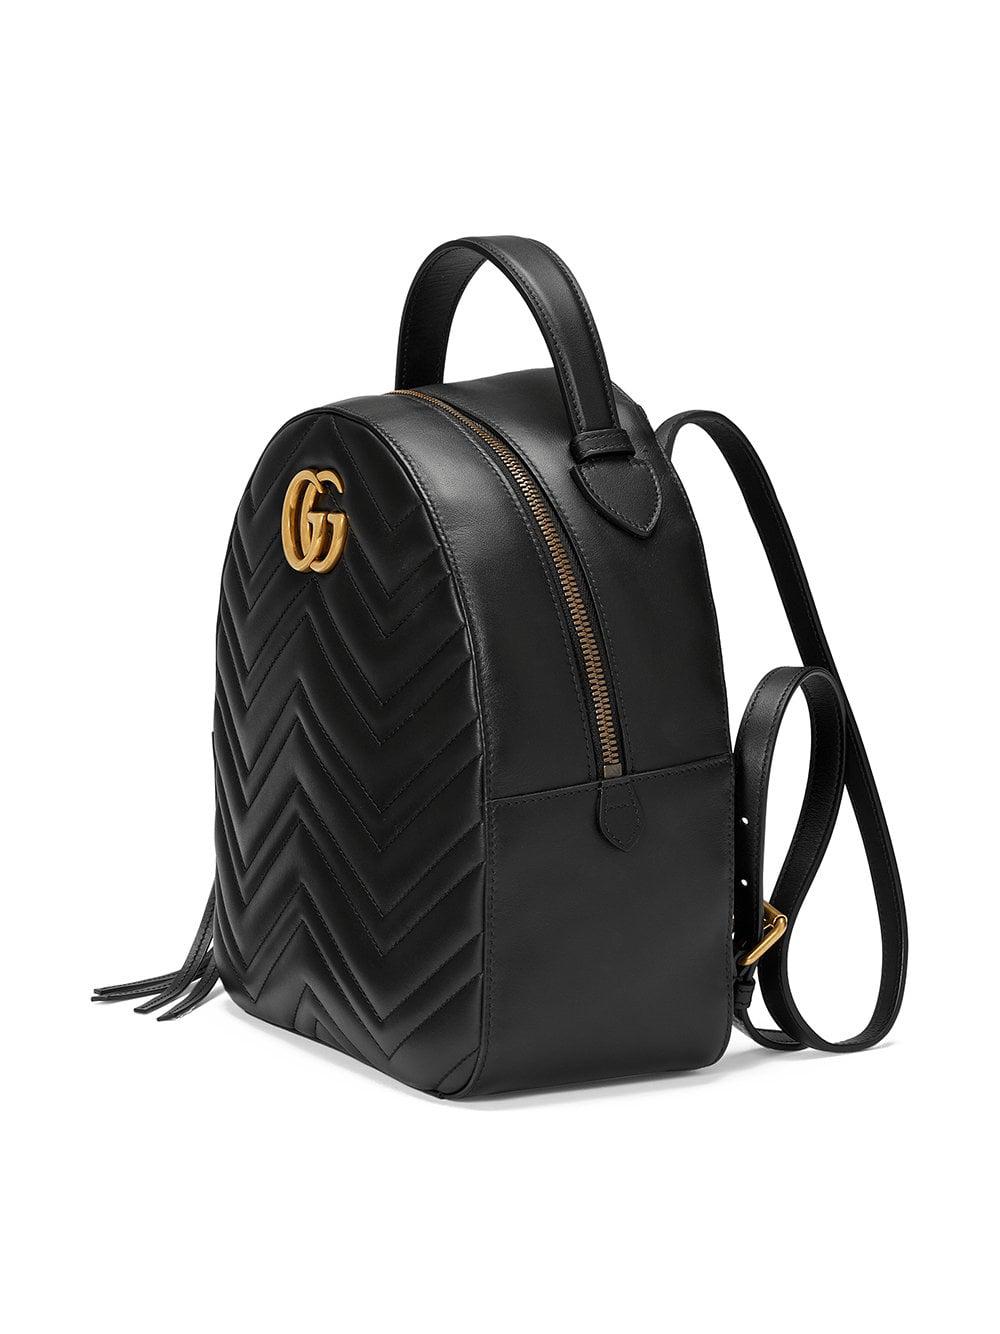 Gucci GG Marmont Quilted Leather Backpack in Black | Lyst